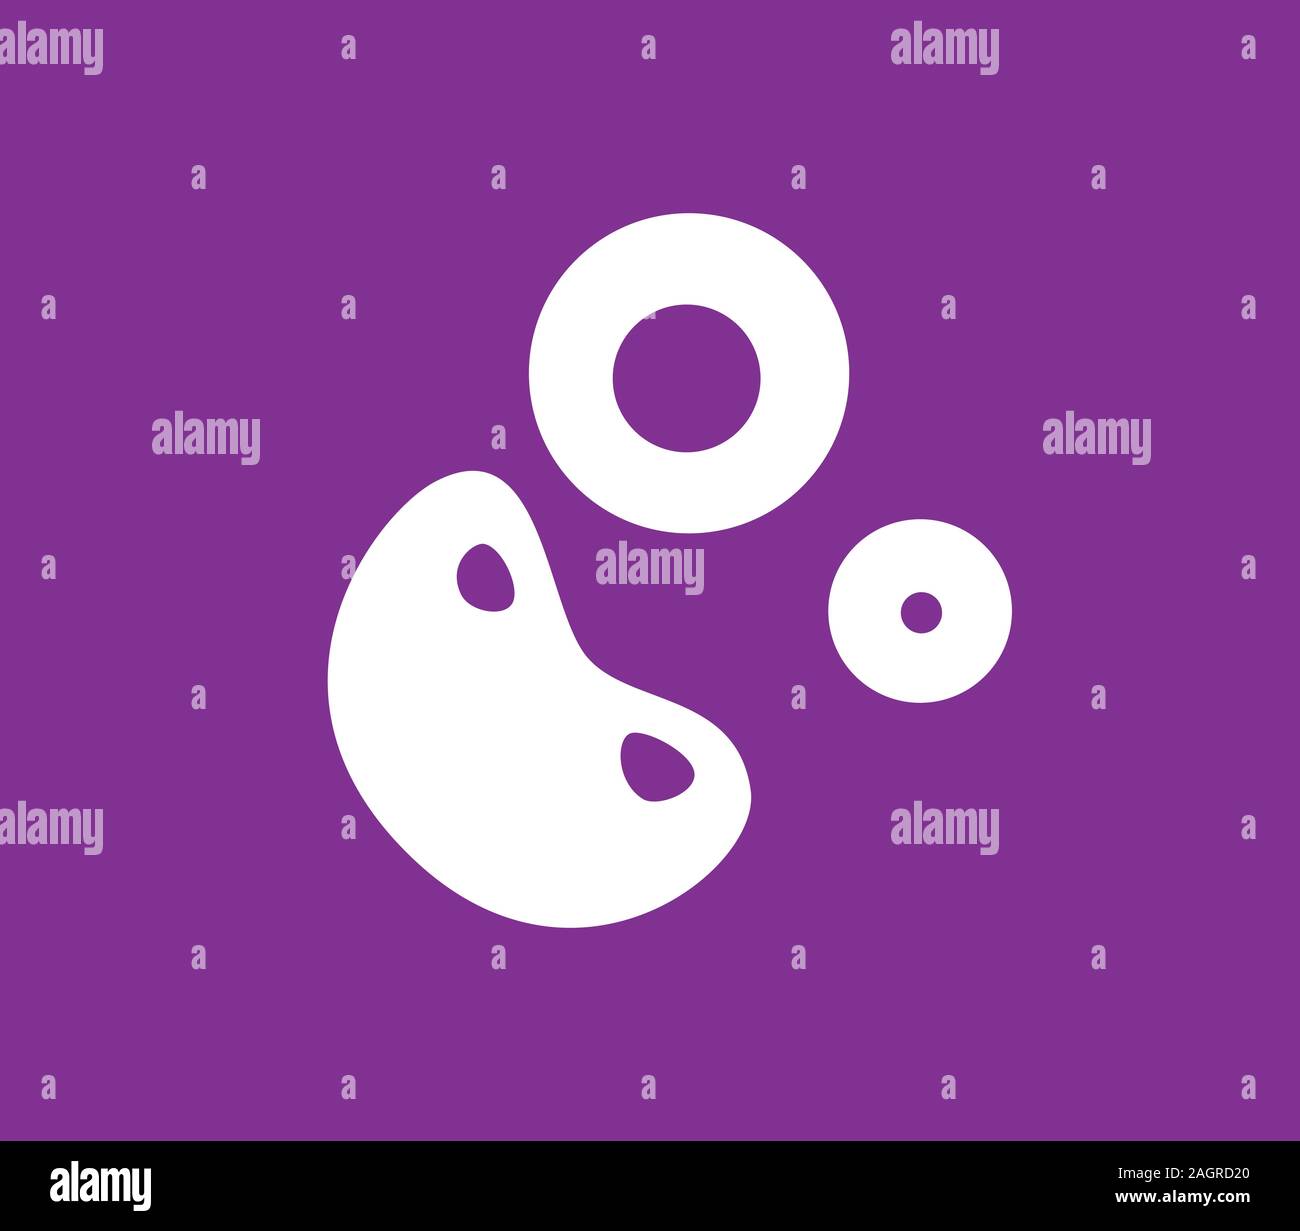 boo letters composition form a scary face on purple background Stock Vector